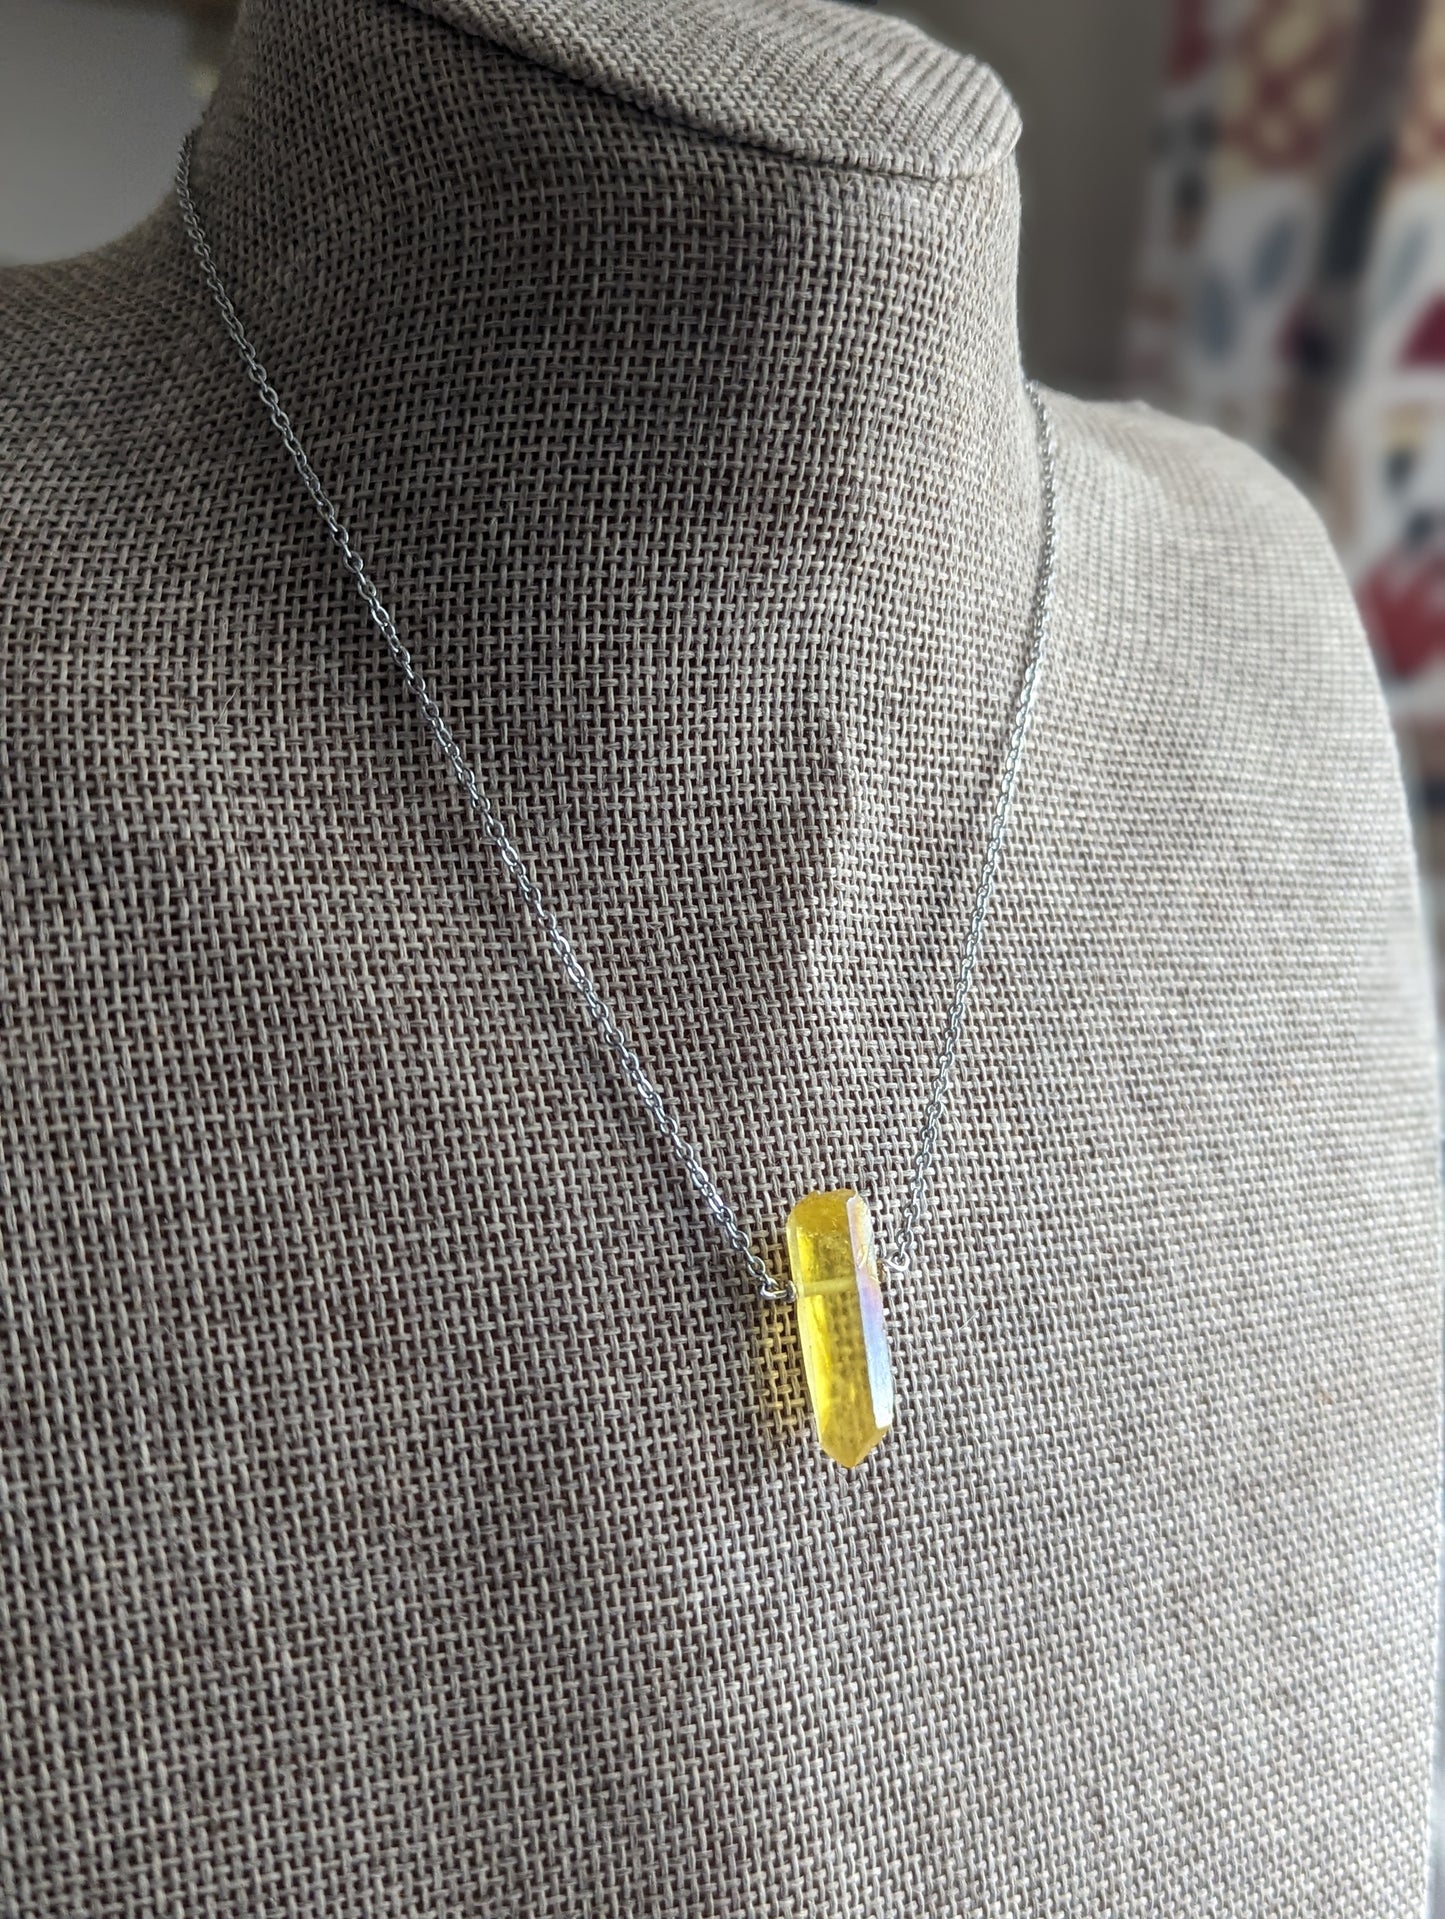 Yellow Quartz Crystal Point on Stainless